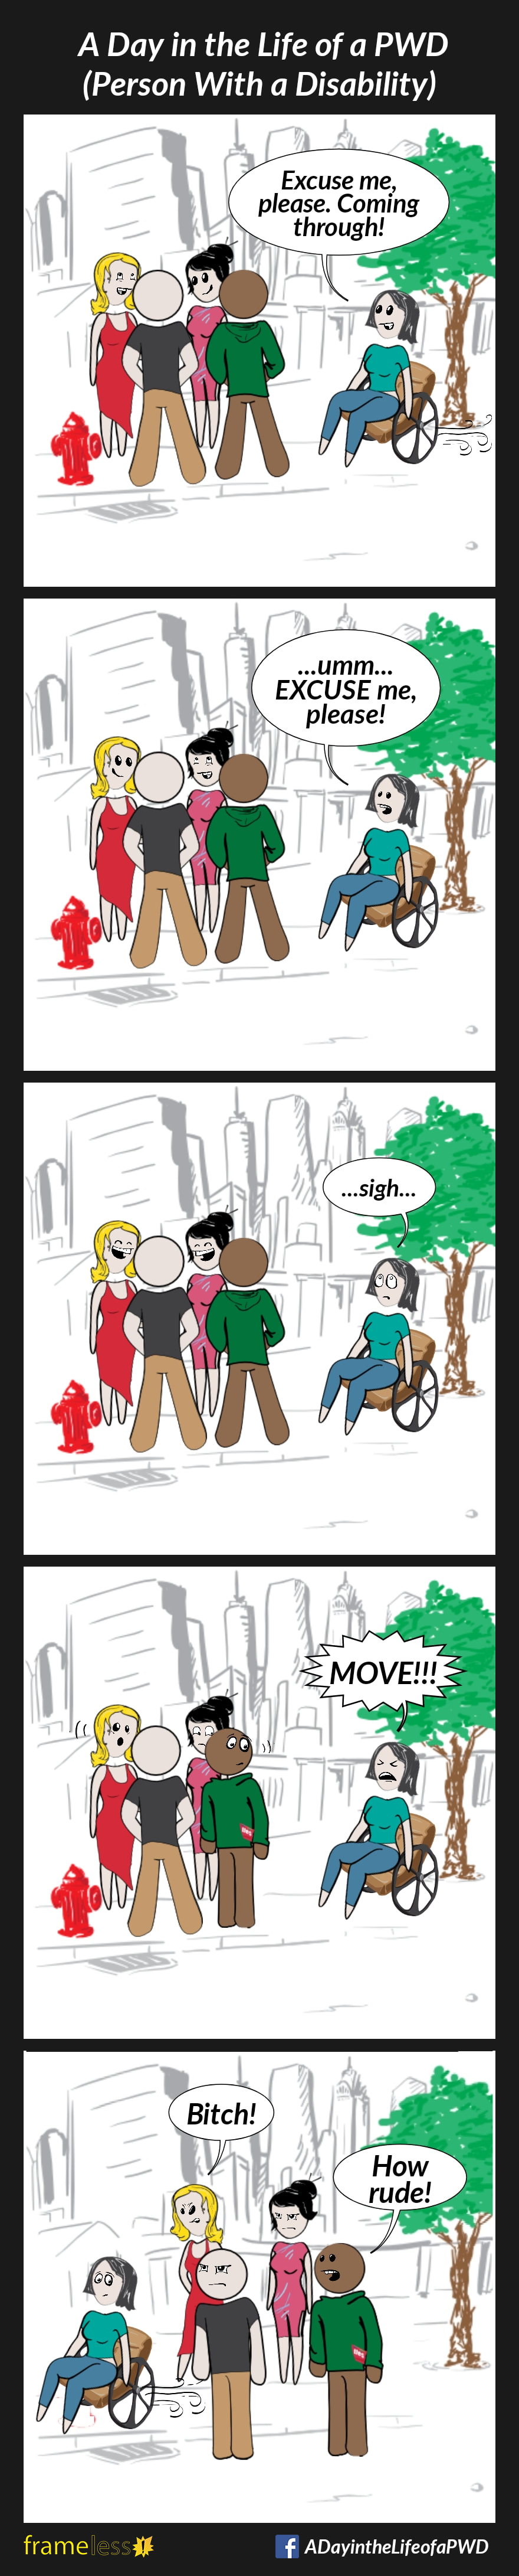 COMIC STRIP 
A Day in the Life of a PWD (Person With a Disability) 

Frame 1:
A woman in a wheelchair traveling down a sidewalk encounters a group of people blocking her path.
WOMAN: Excuse me, please. Coming through!

Frame 2:
The group doesn't notice her, and continues to chat.
WOMAN: ...um...EXCUSE me, please!

Frame 3:
The group continues to ignore her.
The woman rolls her eyes and sighs.

Frame 4:
The woman shouts, 